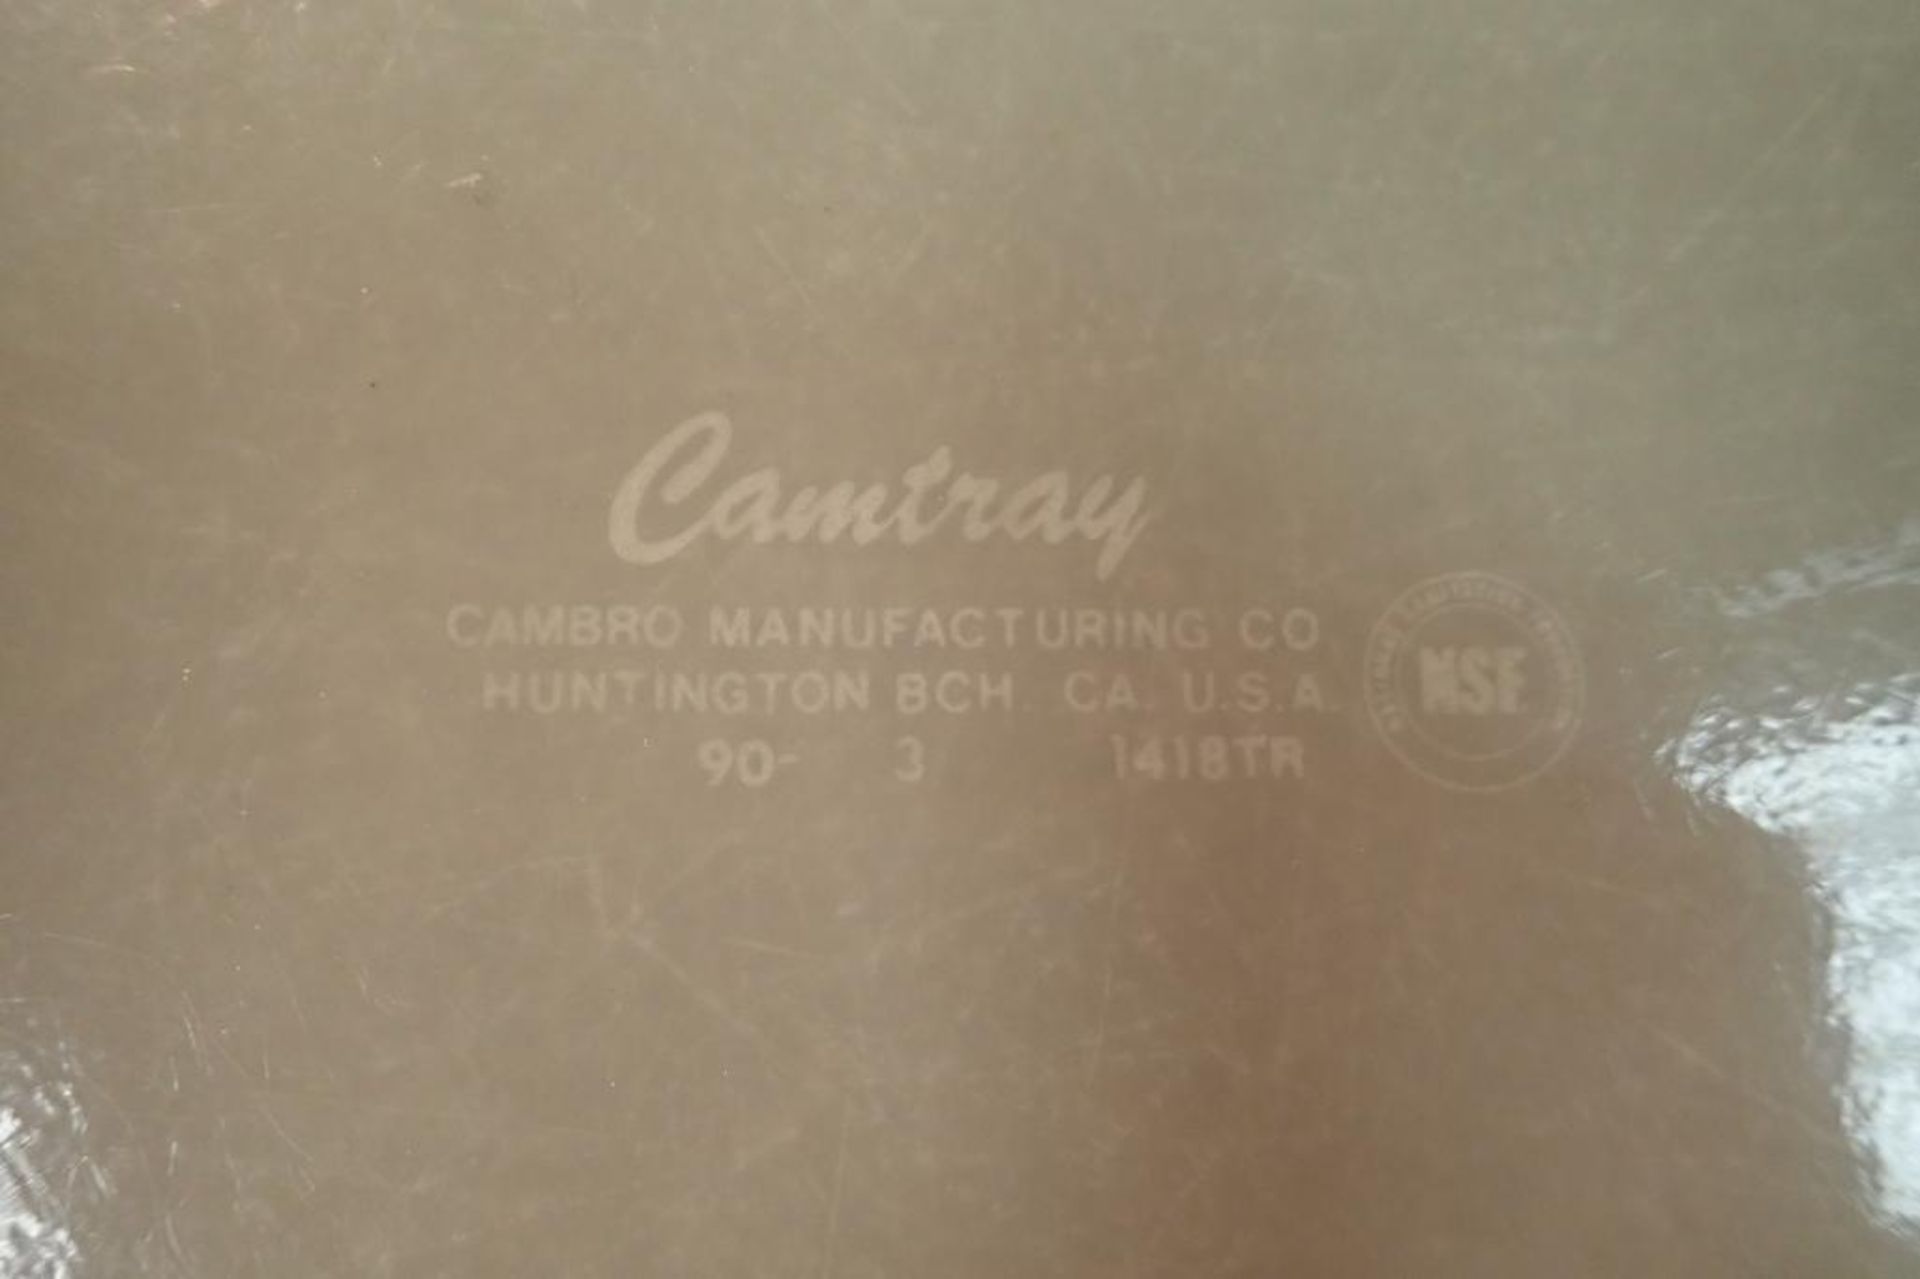 Lot of 50 Cambro camtray plastic trays - Image 5 of 5